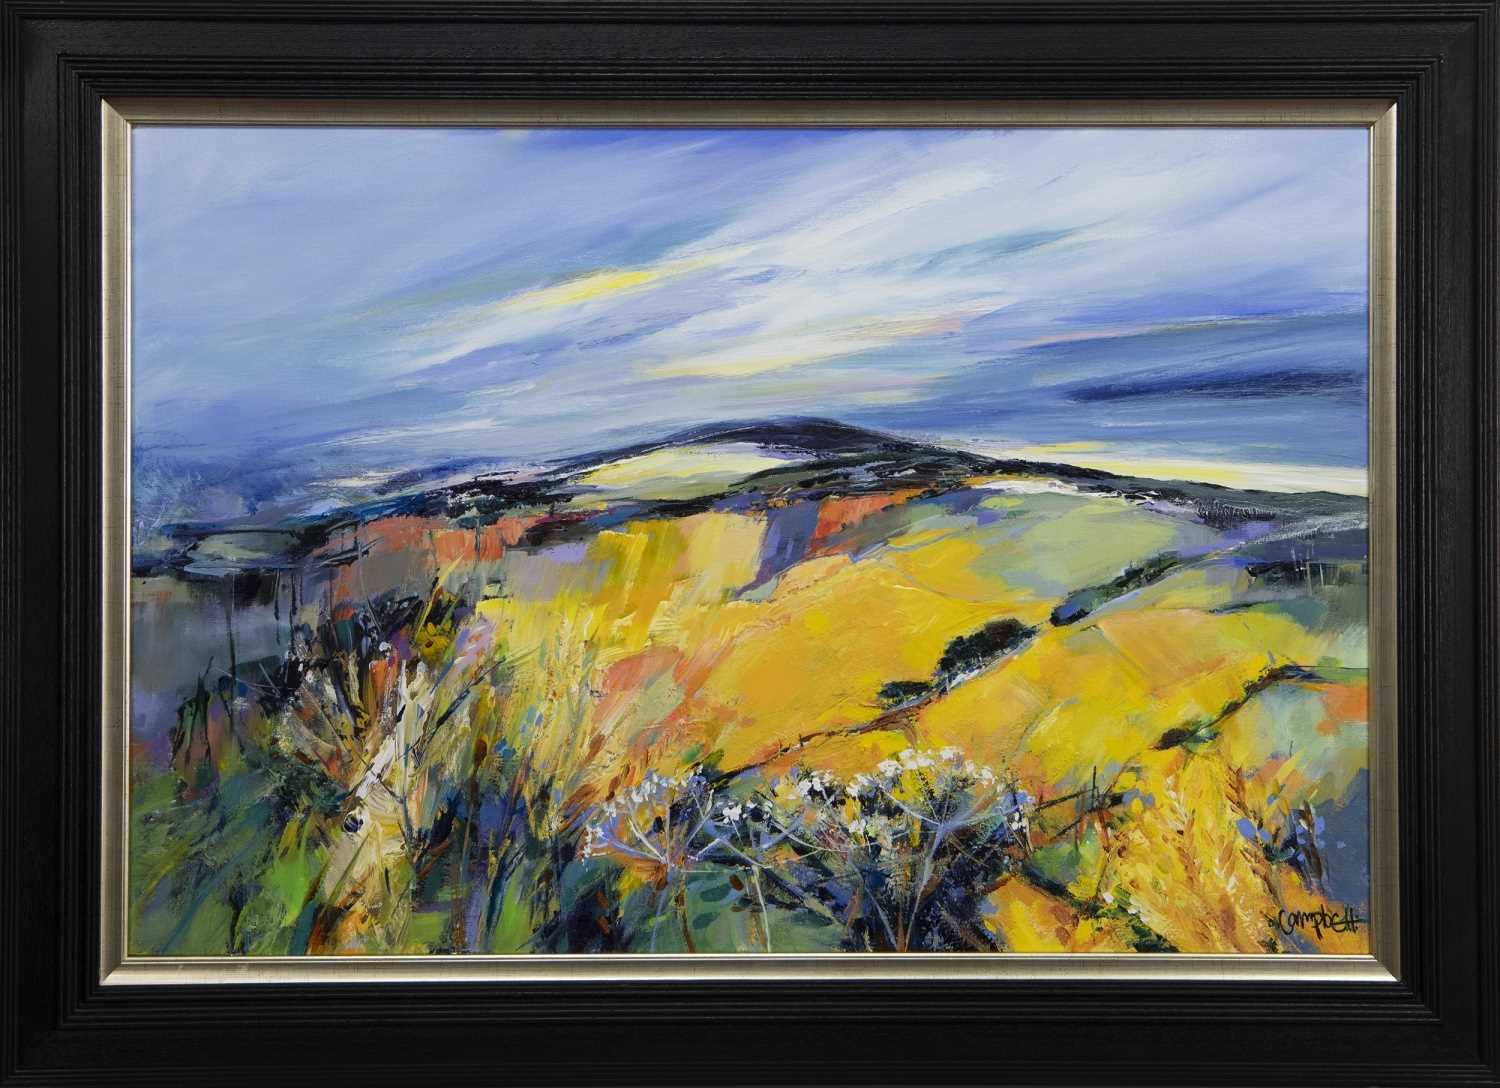 THE WIND THAT SHAKES THE BARLEY, AN ACRYLIC BY SHELAGH CAMPBELL